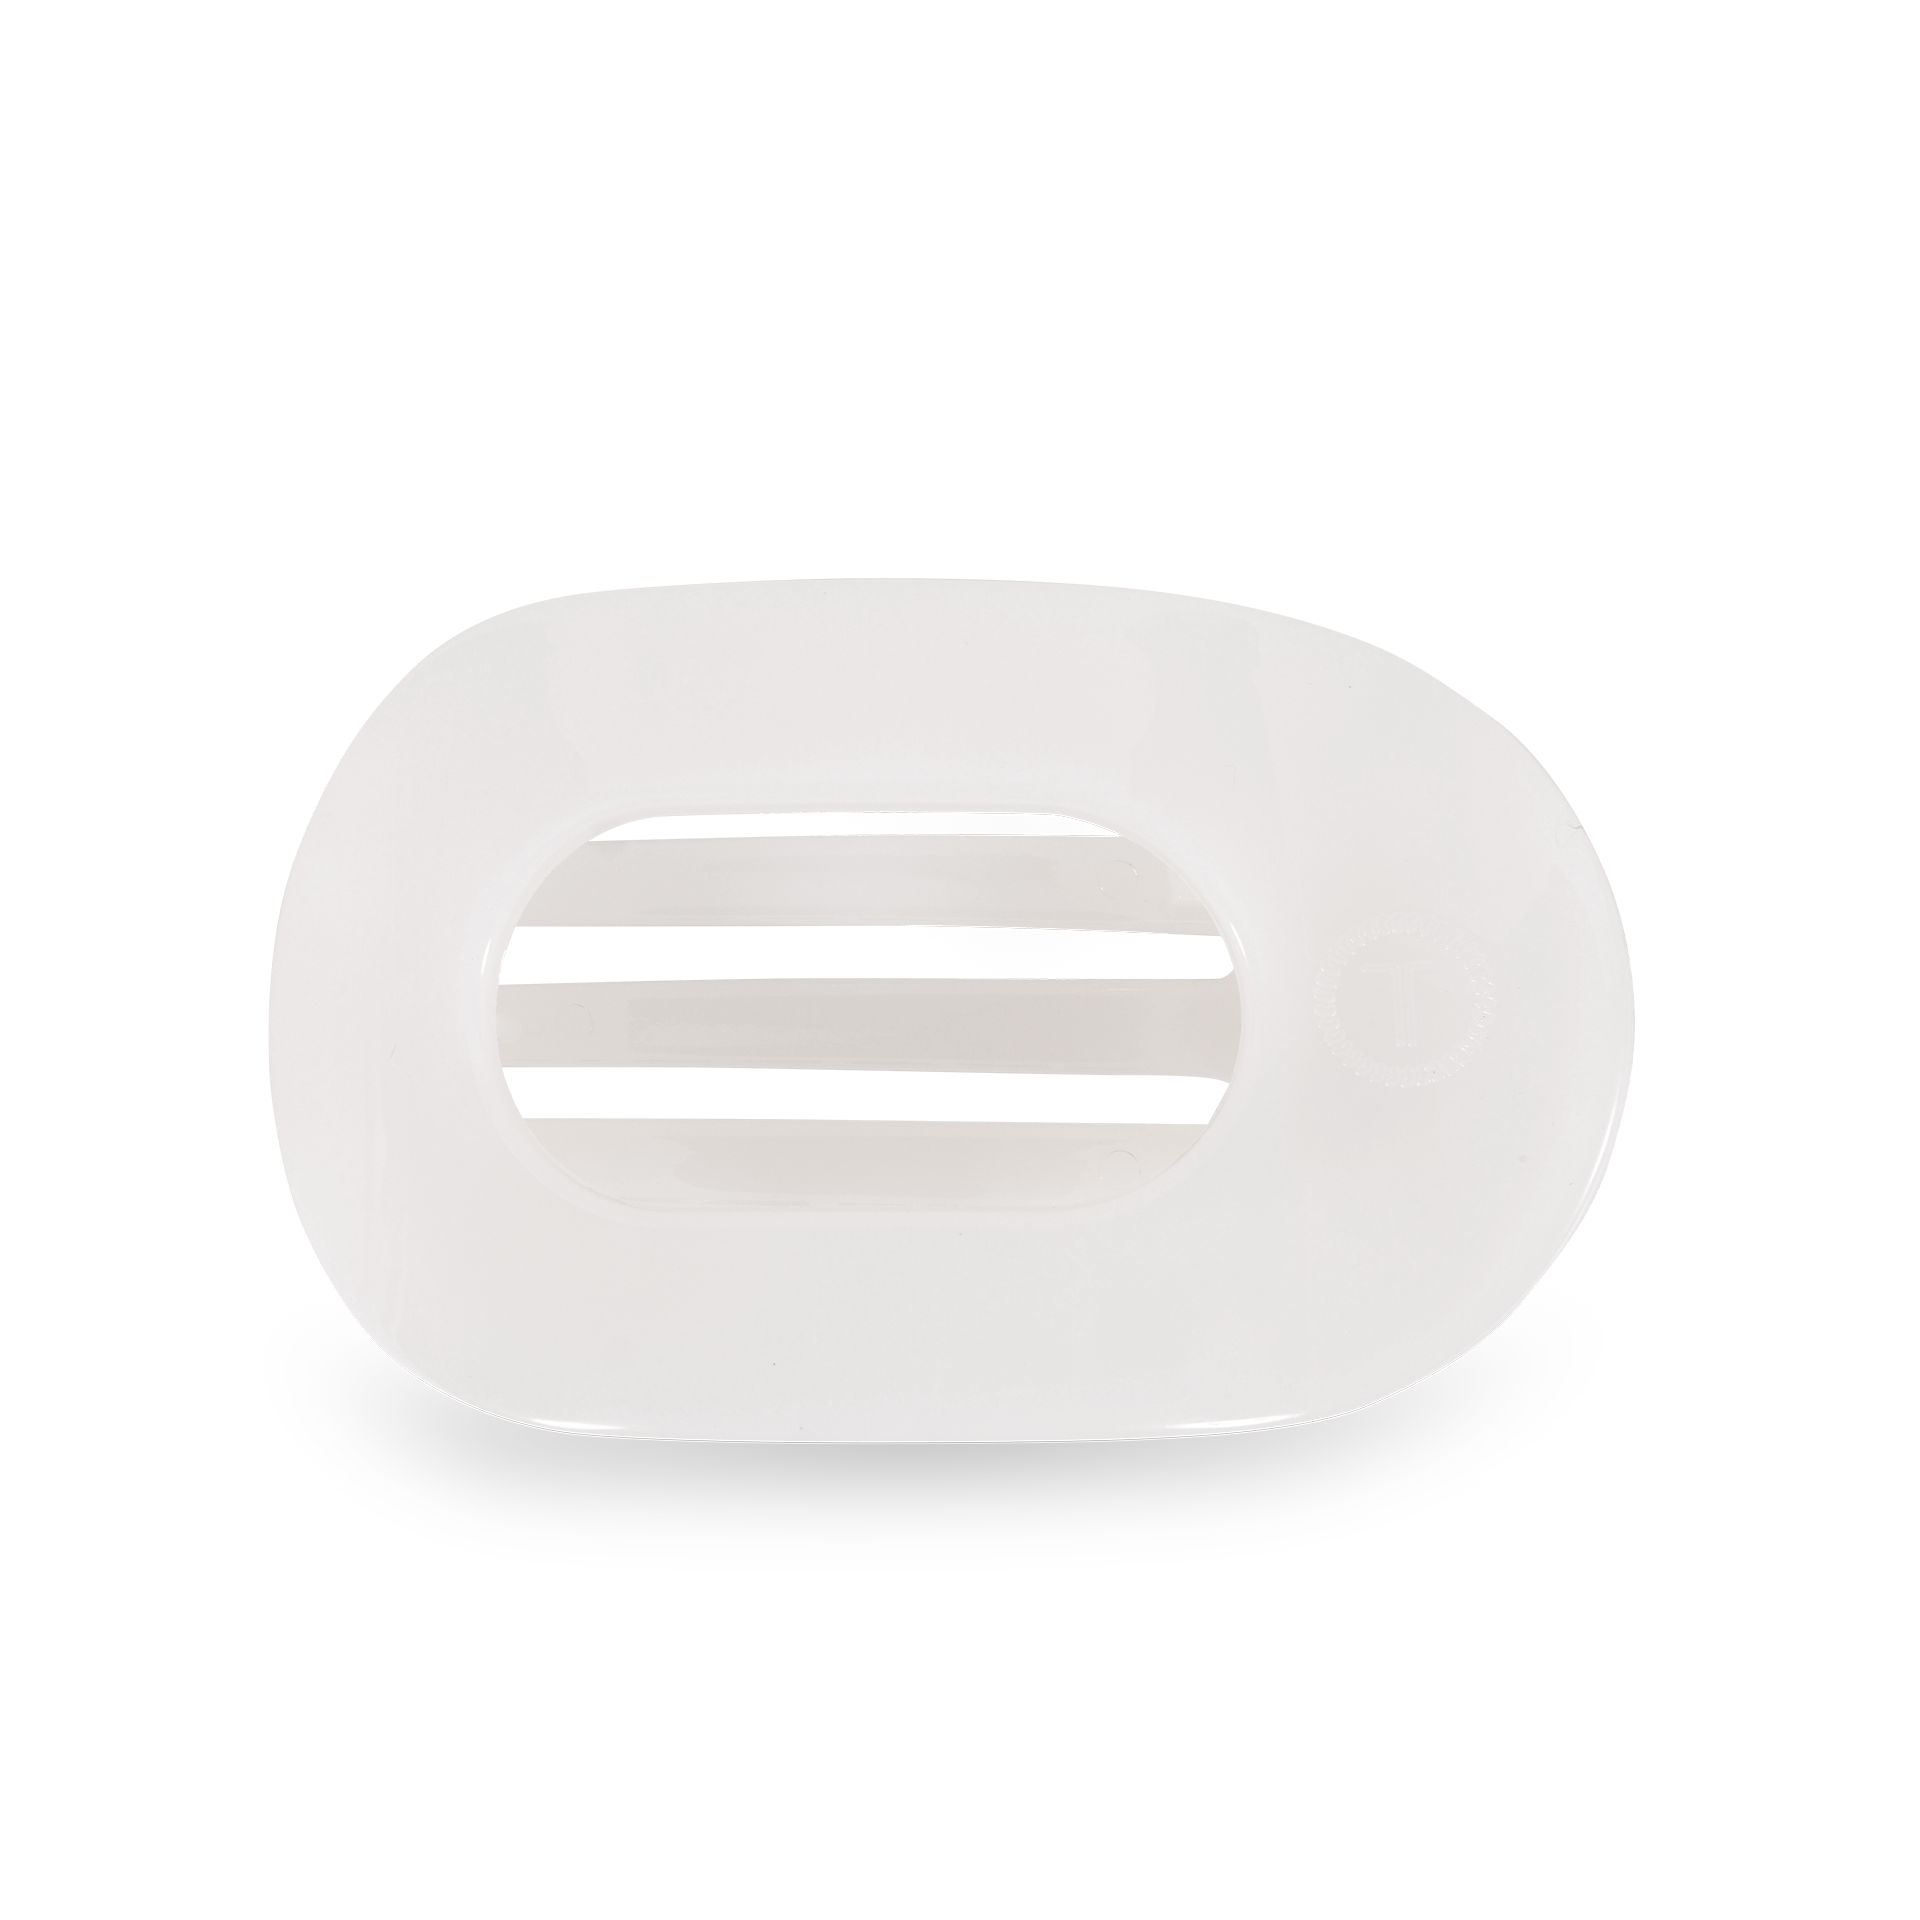 TELETIES - Coconut White Small Flat Round Clip